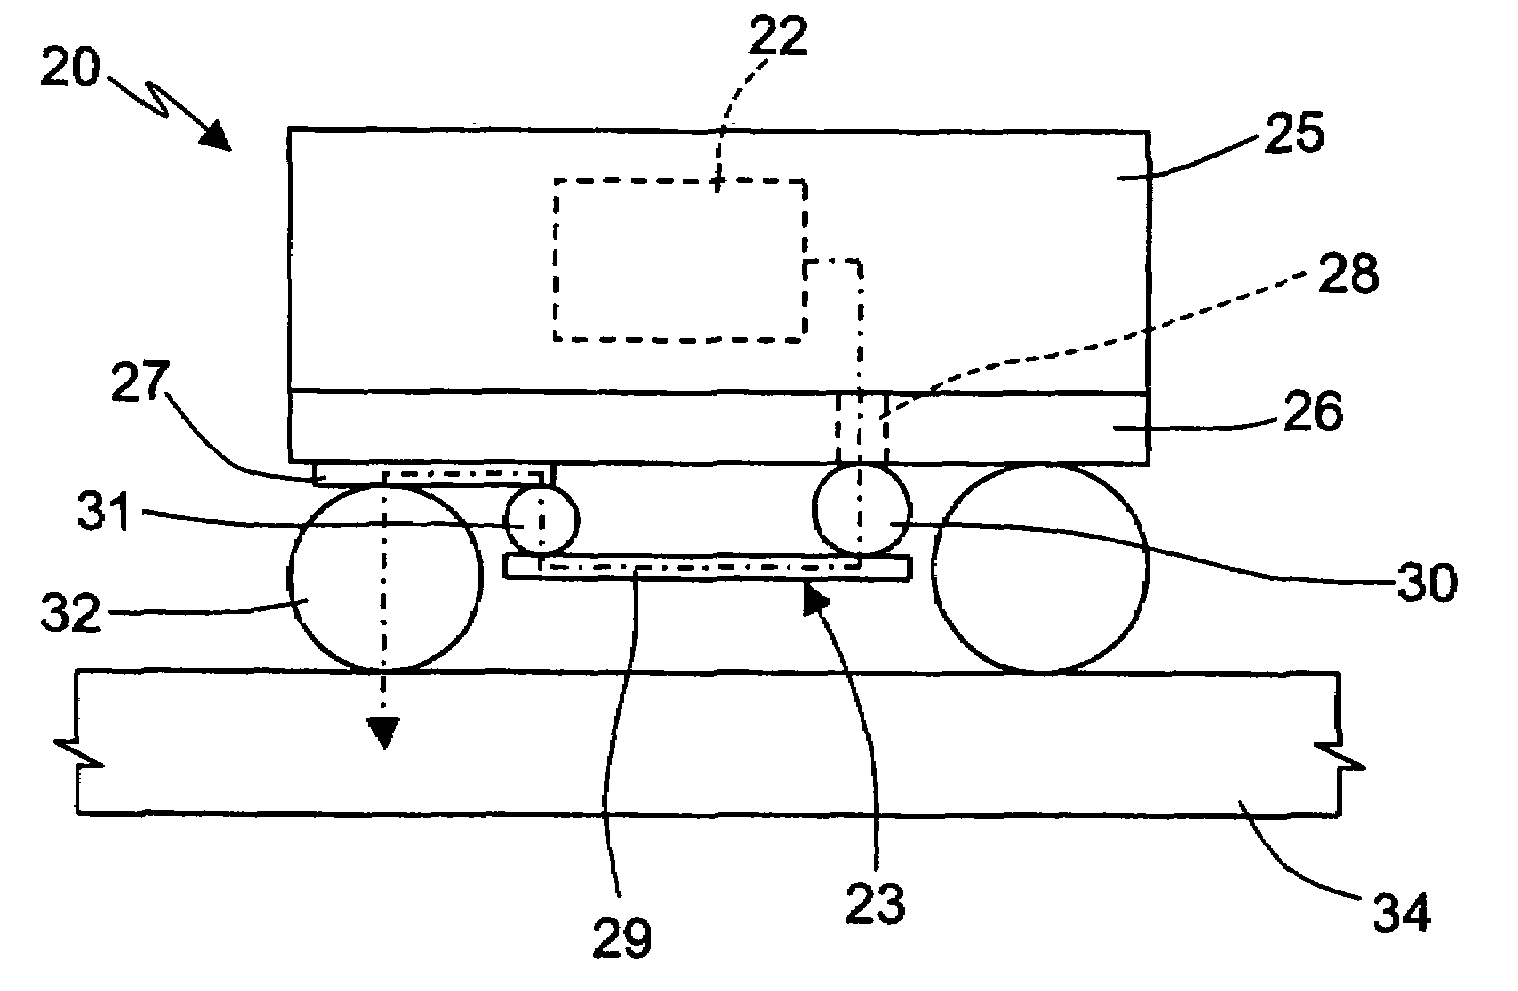 Portable apparatus with an accelerometer device for free-fall detection